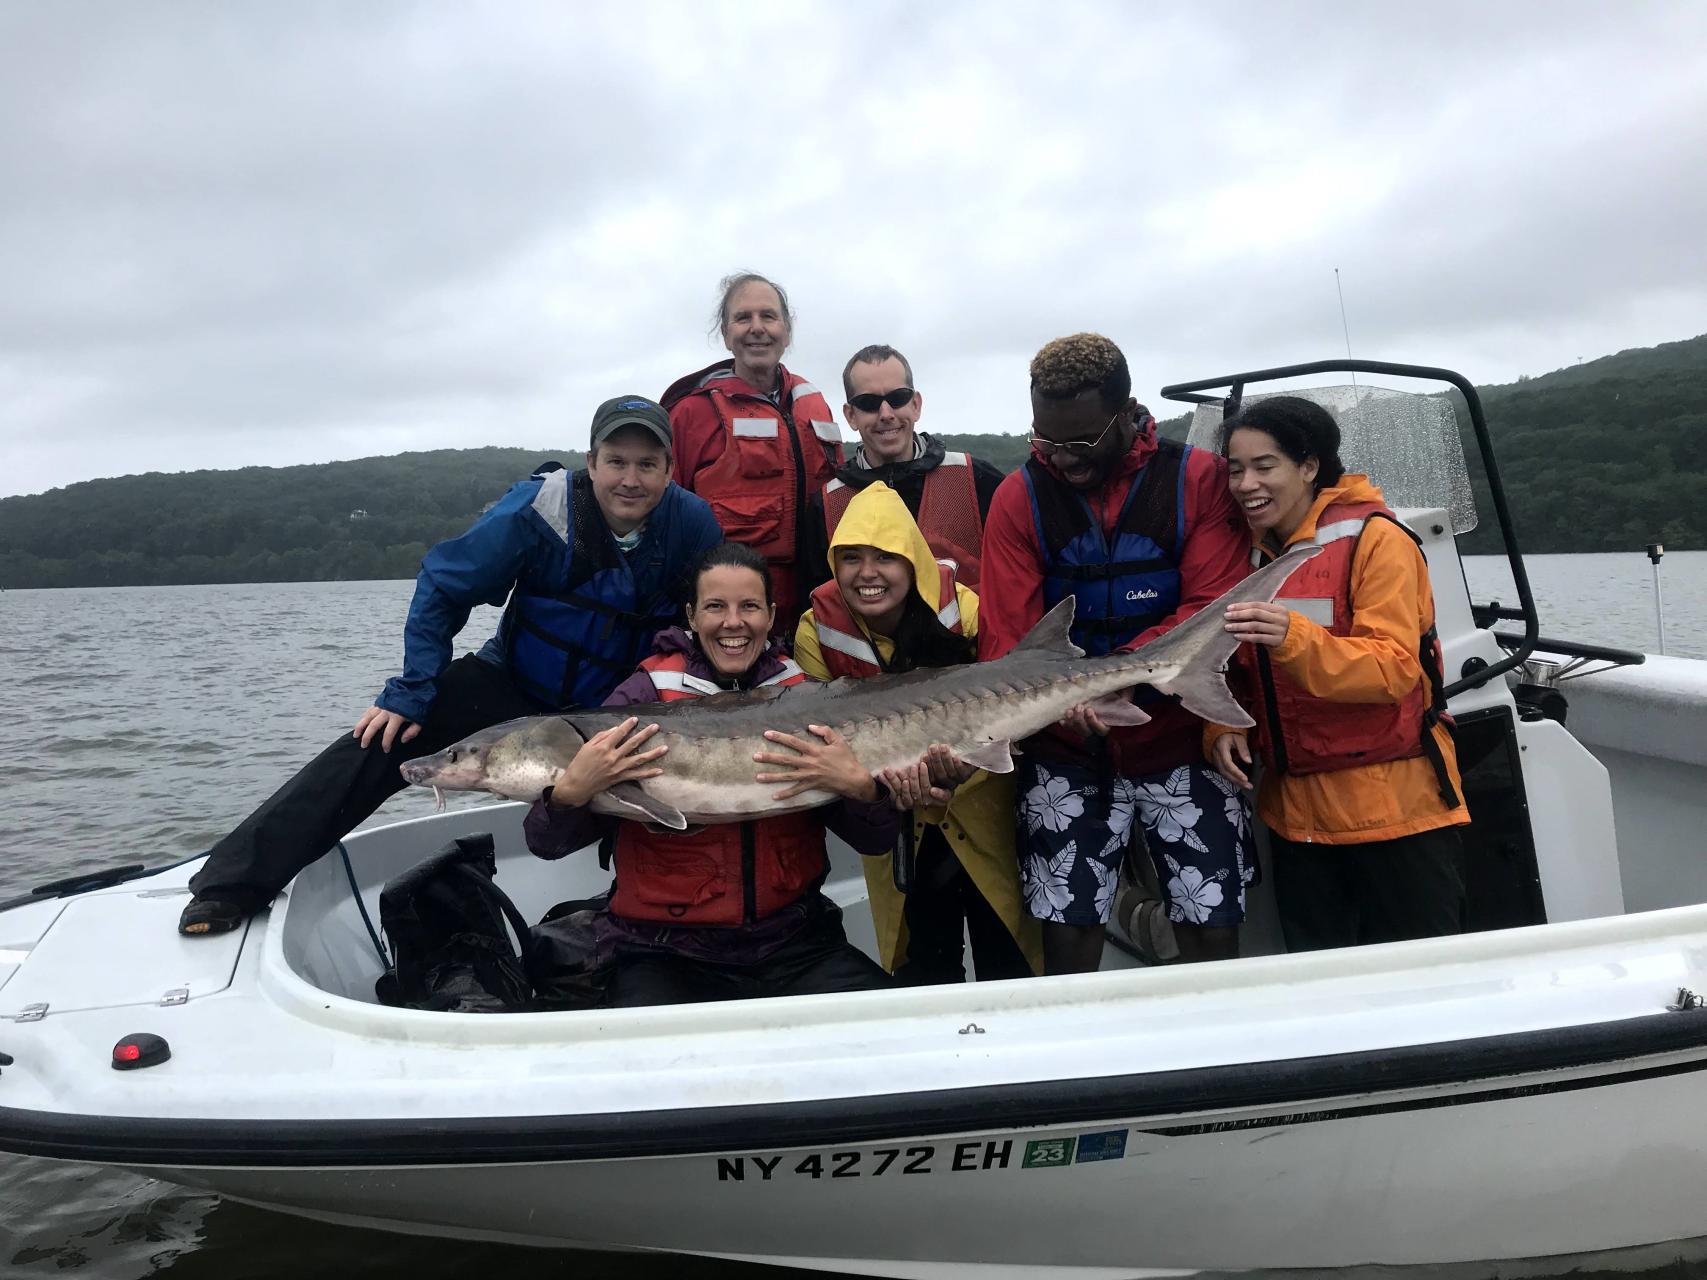 Group of people with large sturgeon on boat